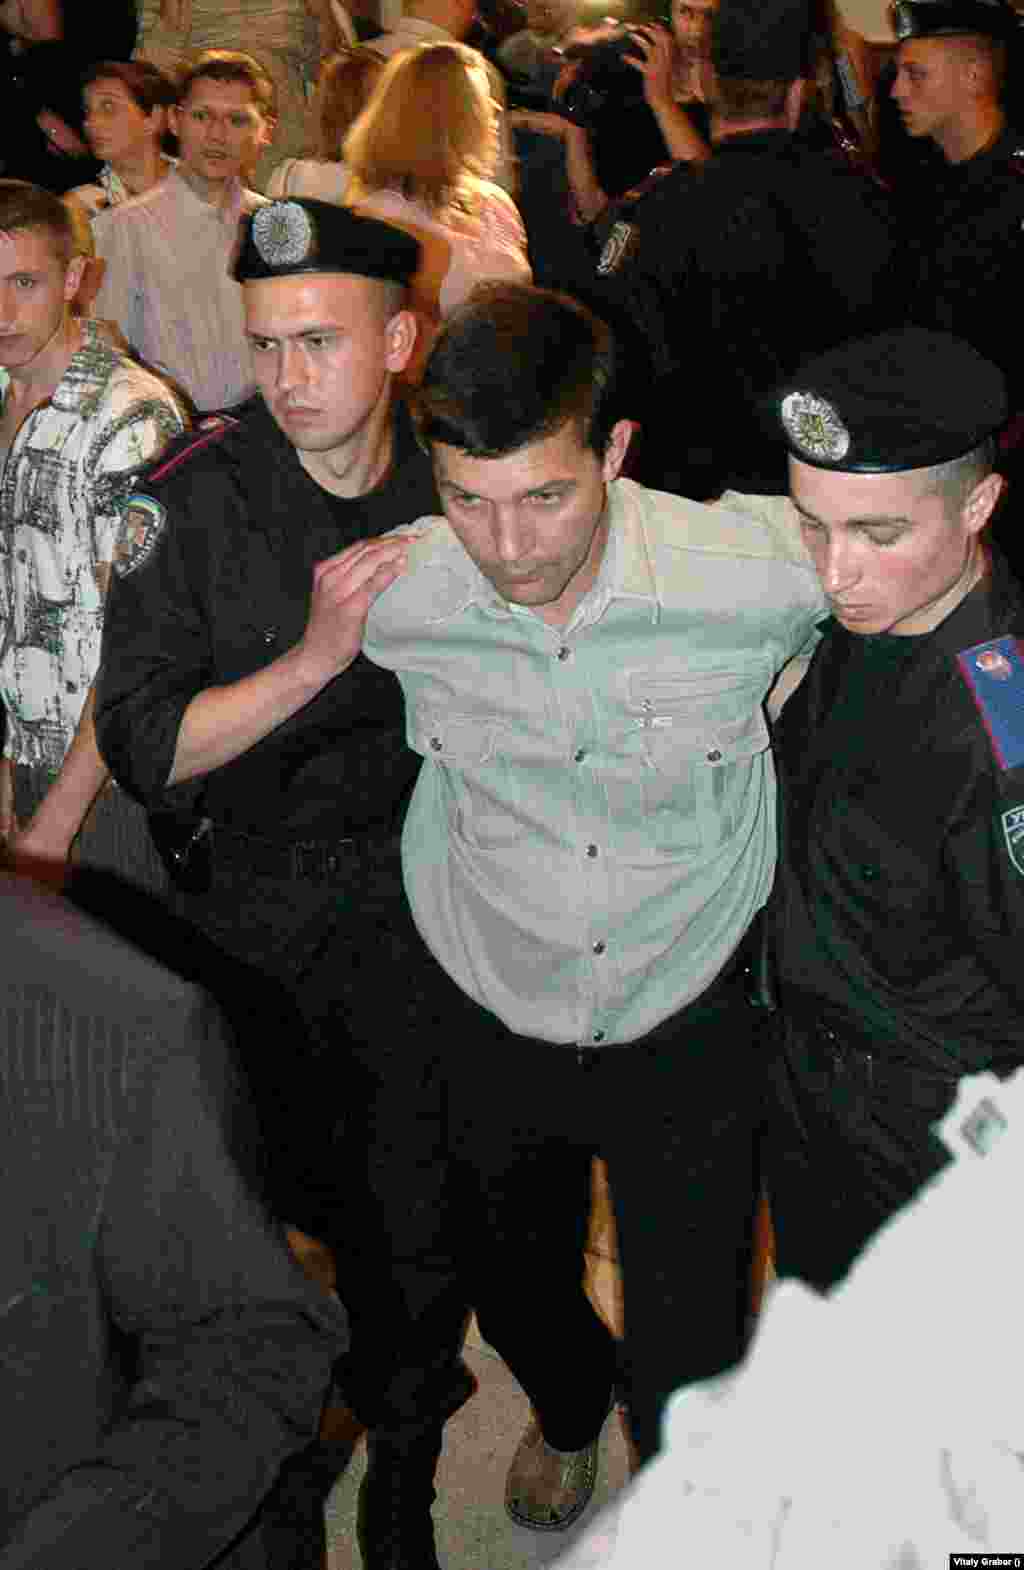 Co-pilot Yuriy Yegorov (pictured after his sentencing in 2005) was released in 2008 after then-President&nbsp;Viktor Yushchenko&nbsp;issued a decree reducing his sentence to 3 1/2 years.&nbsp; A former military adviser to former President Leonid Kuchma blamed inadequate safety measures for the high loss of life at the air show. &quot;The main problem was the lack of adequate safety precautions on the ground that could have helped the pilots maneuver away from crowds in an emergency,&quot; Vadim Hrechaninov was quoted as saying by the Interfax-Ukraine news agency at the time.